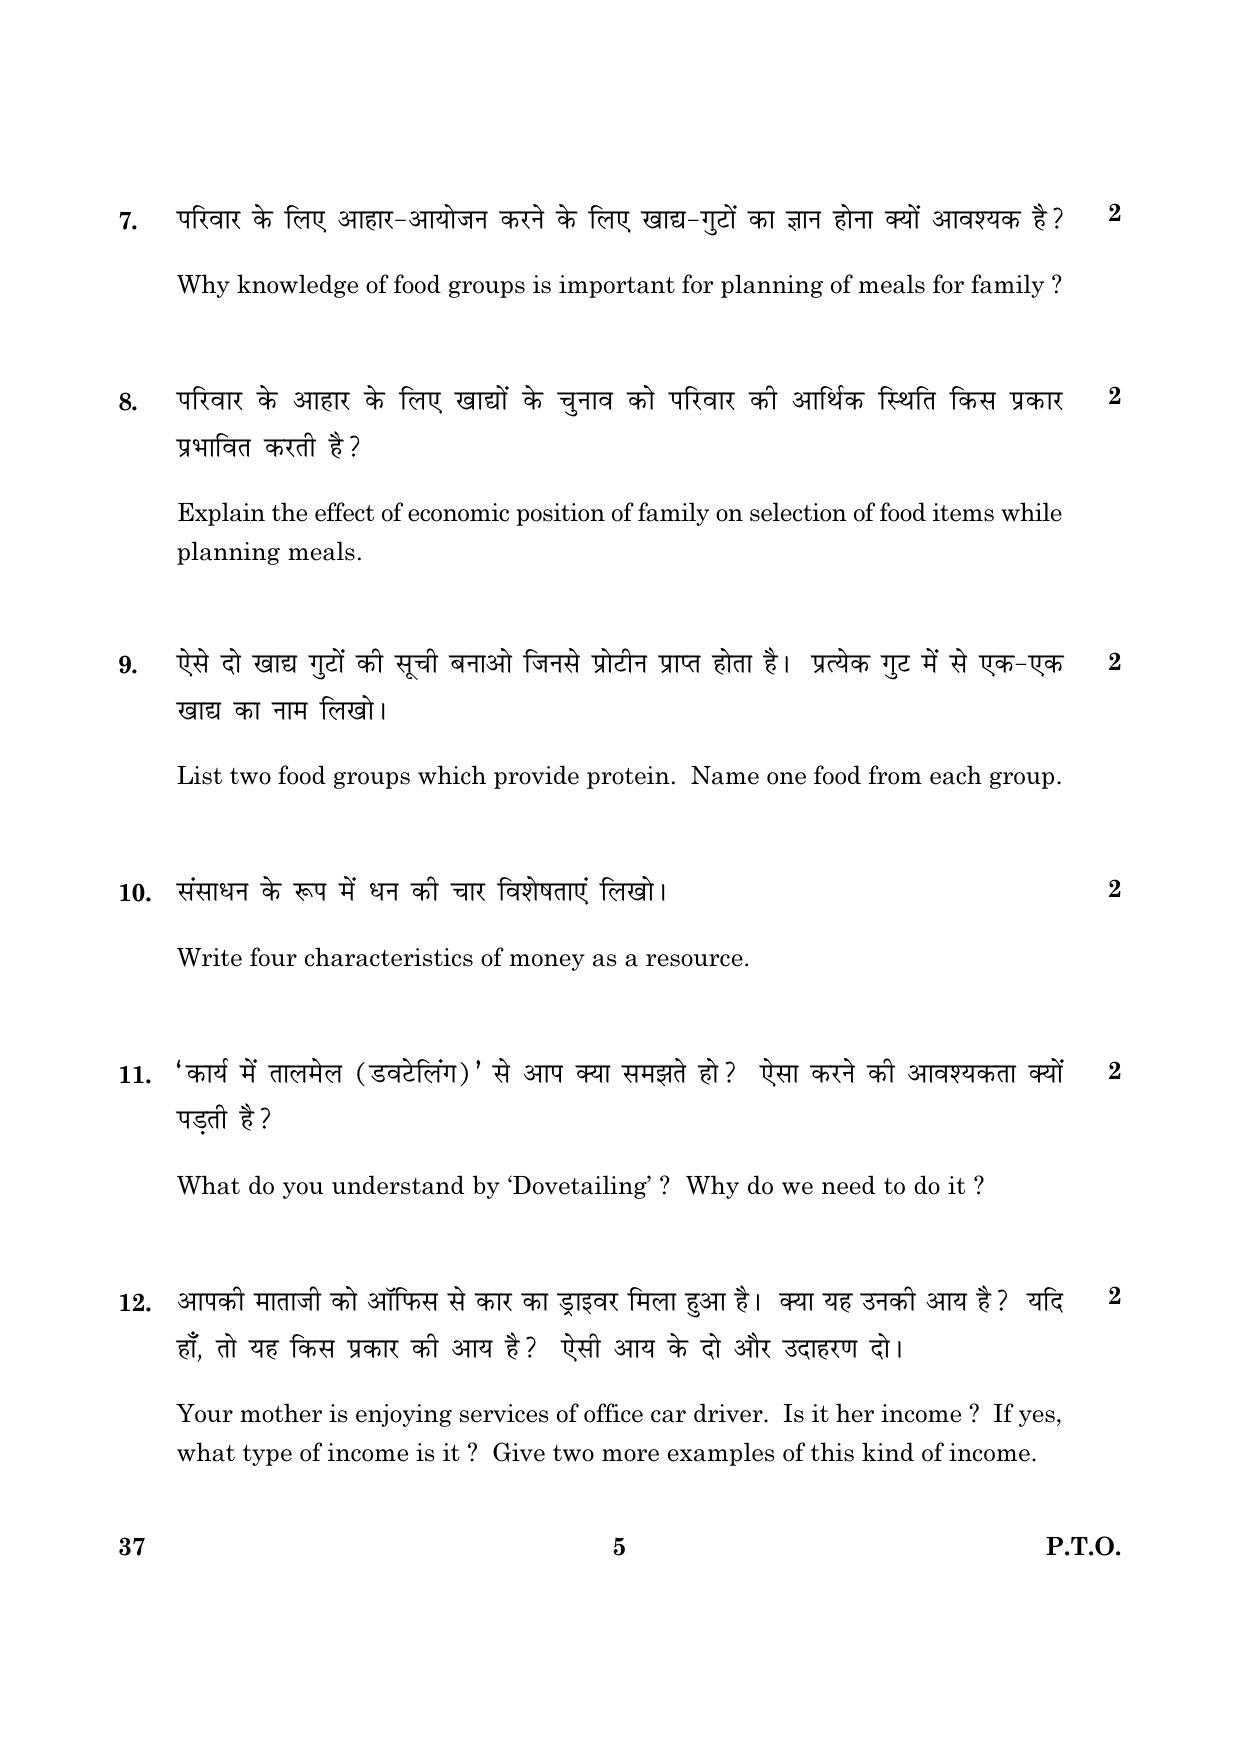 CBSE Class 10 037 Home Science 2016 Question Paper - Page 5